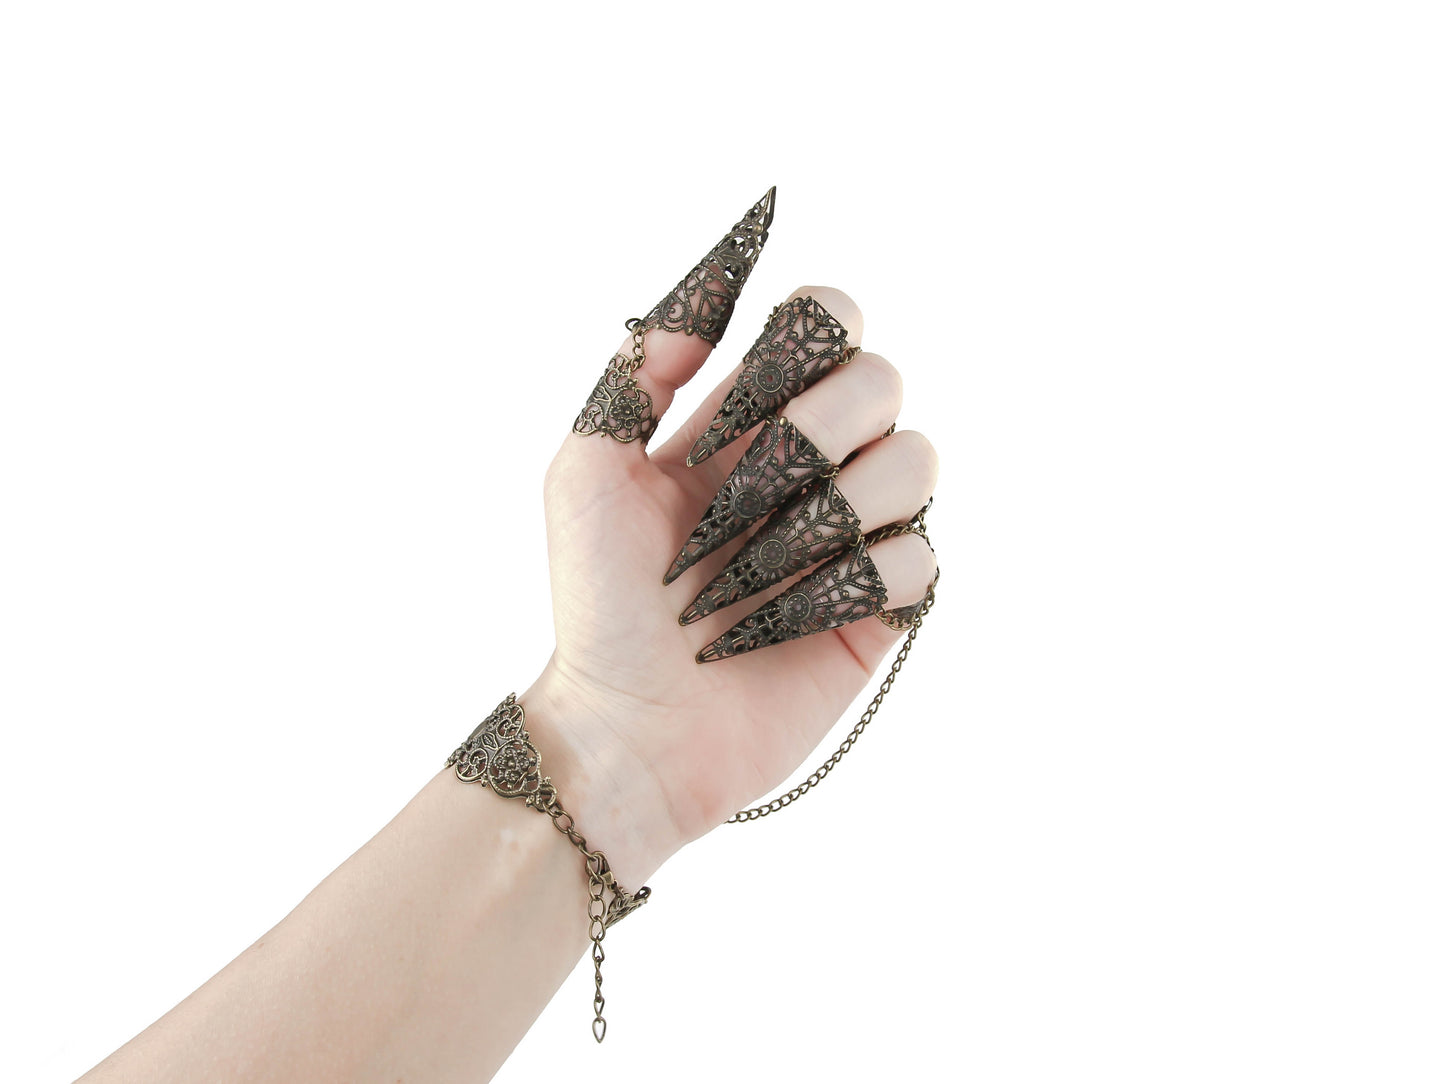 Rear view with the focus on claw rings of an Elegant hand displaying ornate bronze nail rings connected by delicate chains, epitomizing a luxurious gothic beauty and witchy aesthetic, ideal for enhancing a goth-inspired look.